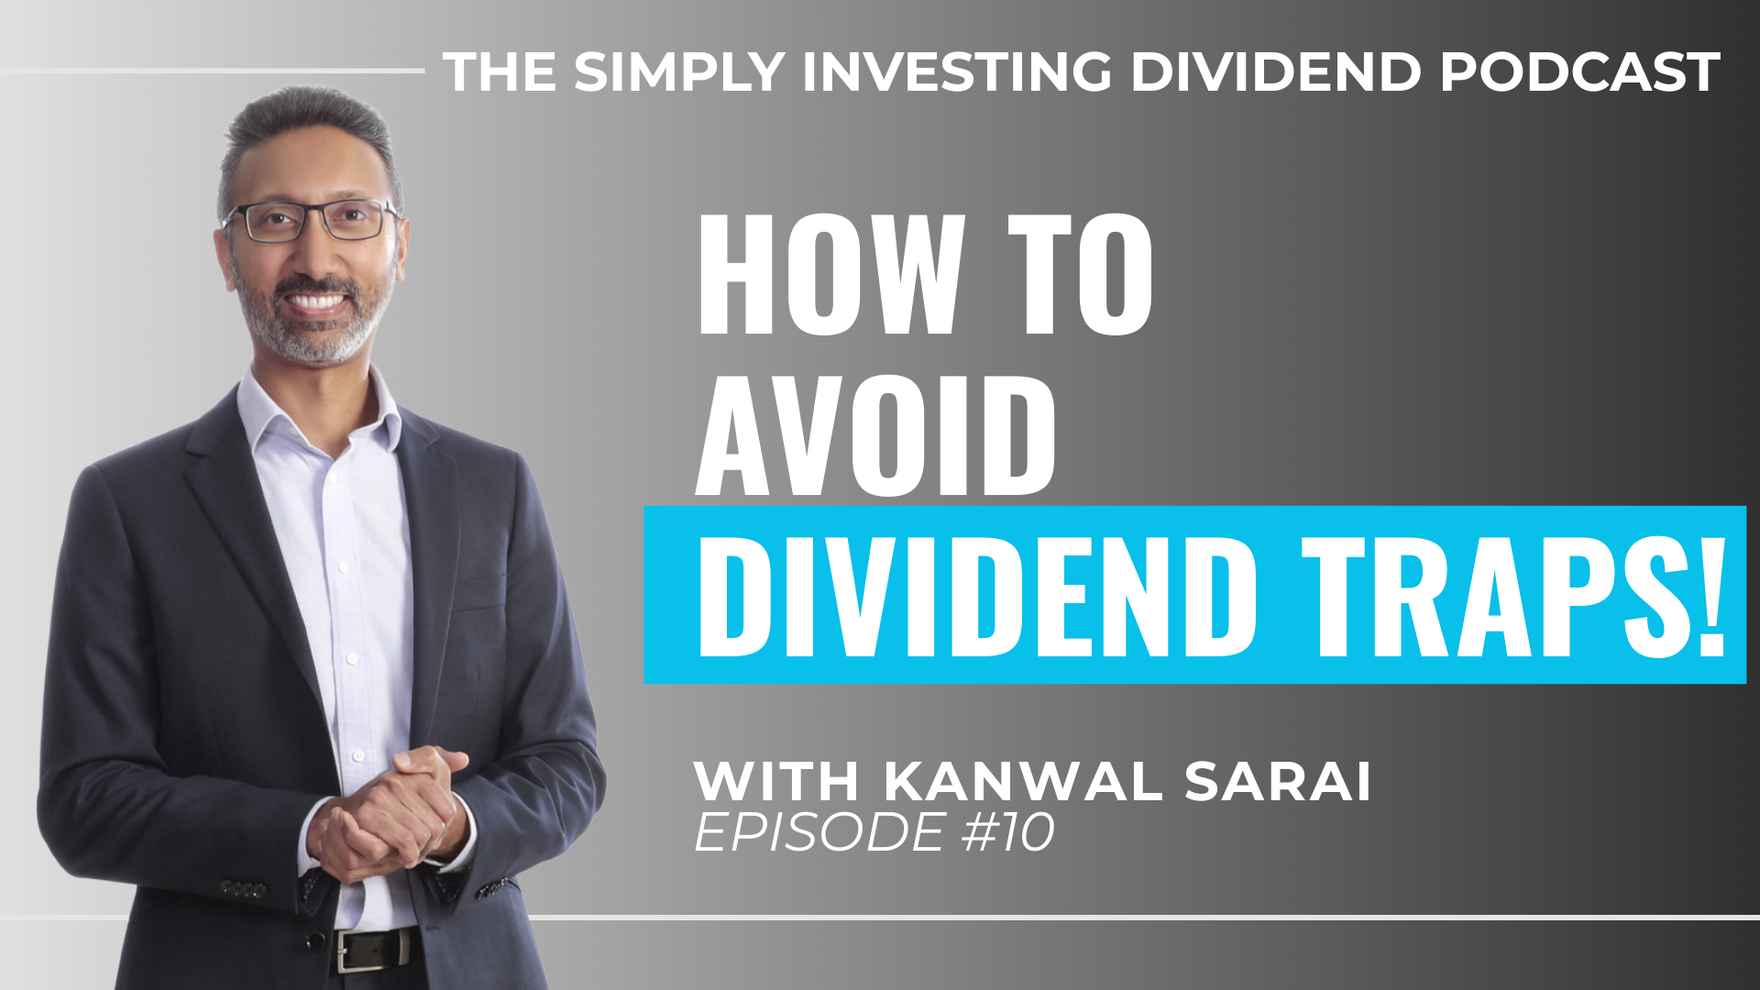 Simply Investing Dividend Podcast Episode 10 - How to Avoid Dividend Traps